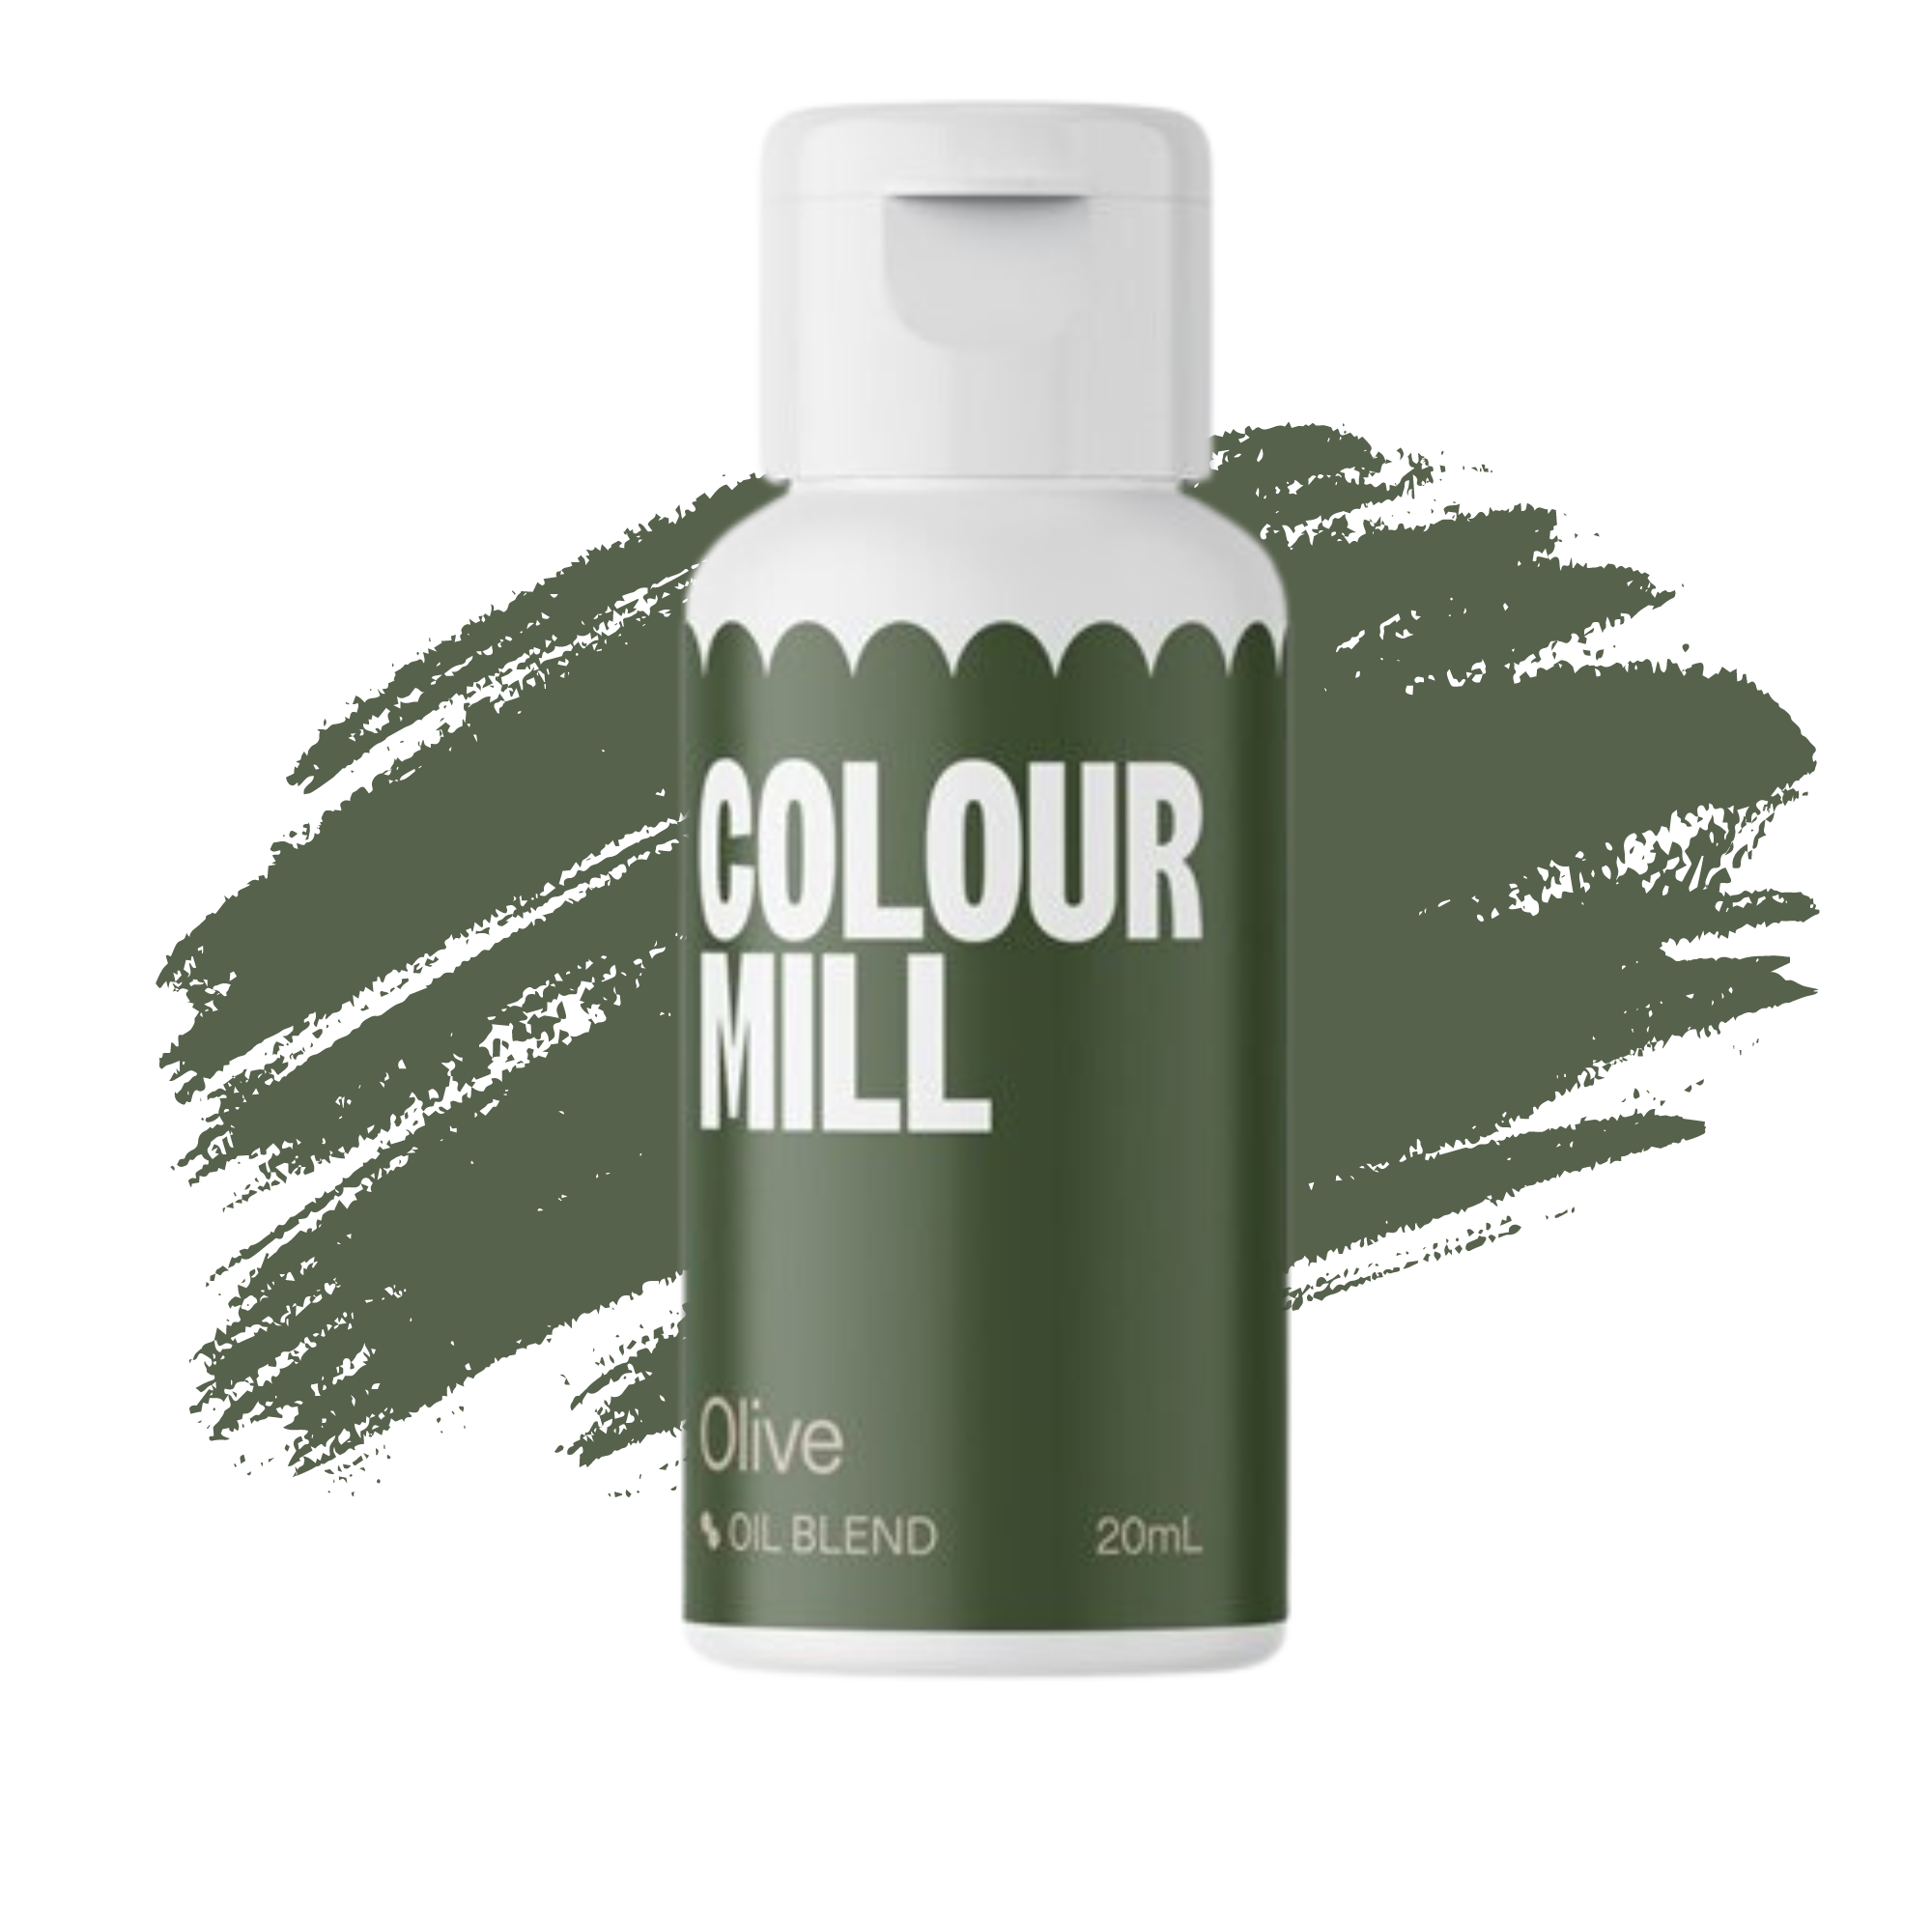 Colour Mill Olive Green Food Colouring, Oil Based Food Colouring, Olive Green Food Colouring, Colour Mill Food Colouring